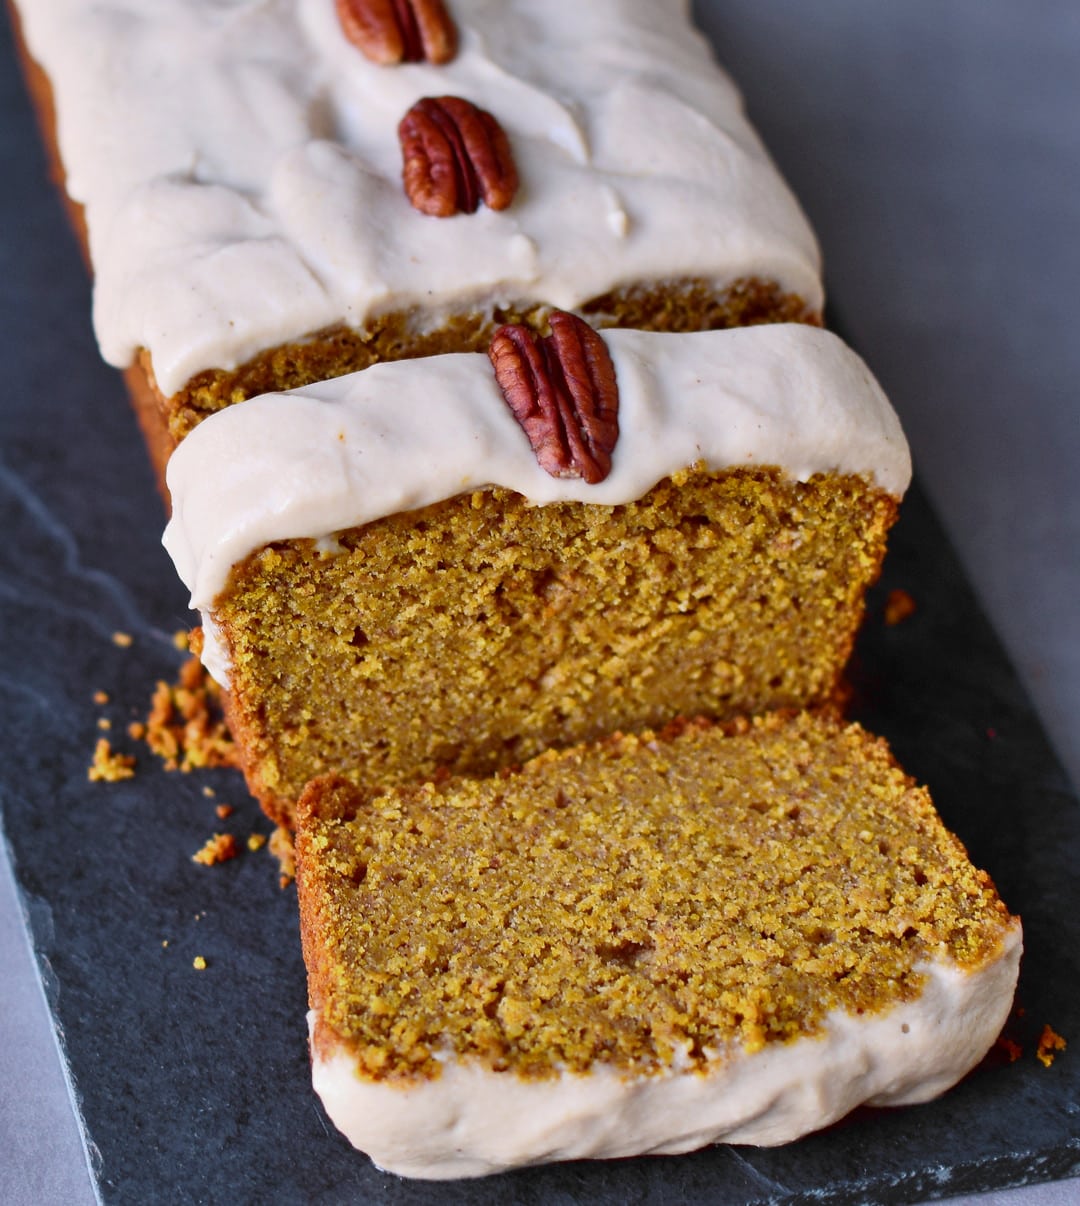 Vegan pumpkin cake with a fluffy cashew frosting. This vegan cake is gluten-free, oil-free, plant-based (egg-free, dairy-free), easy to make and healthy. Perfect recipe for autumn/fall